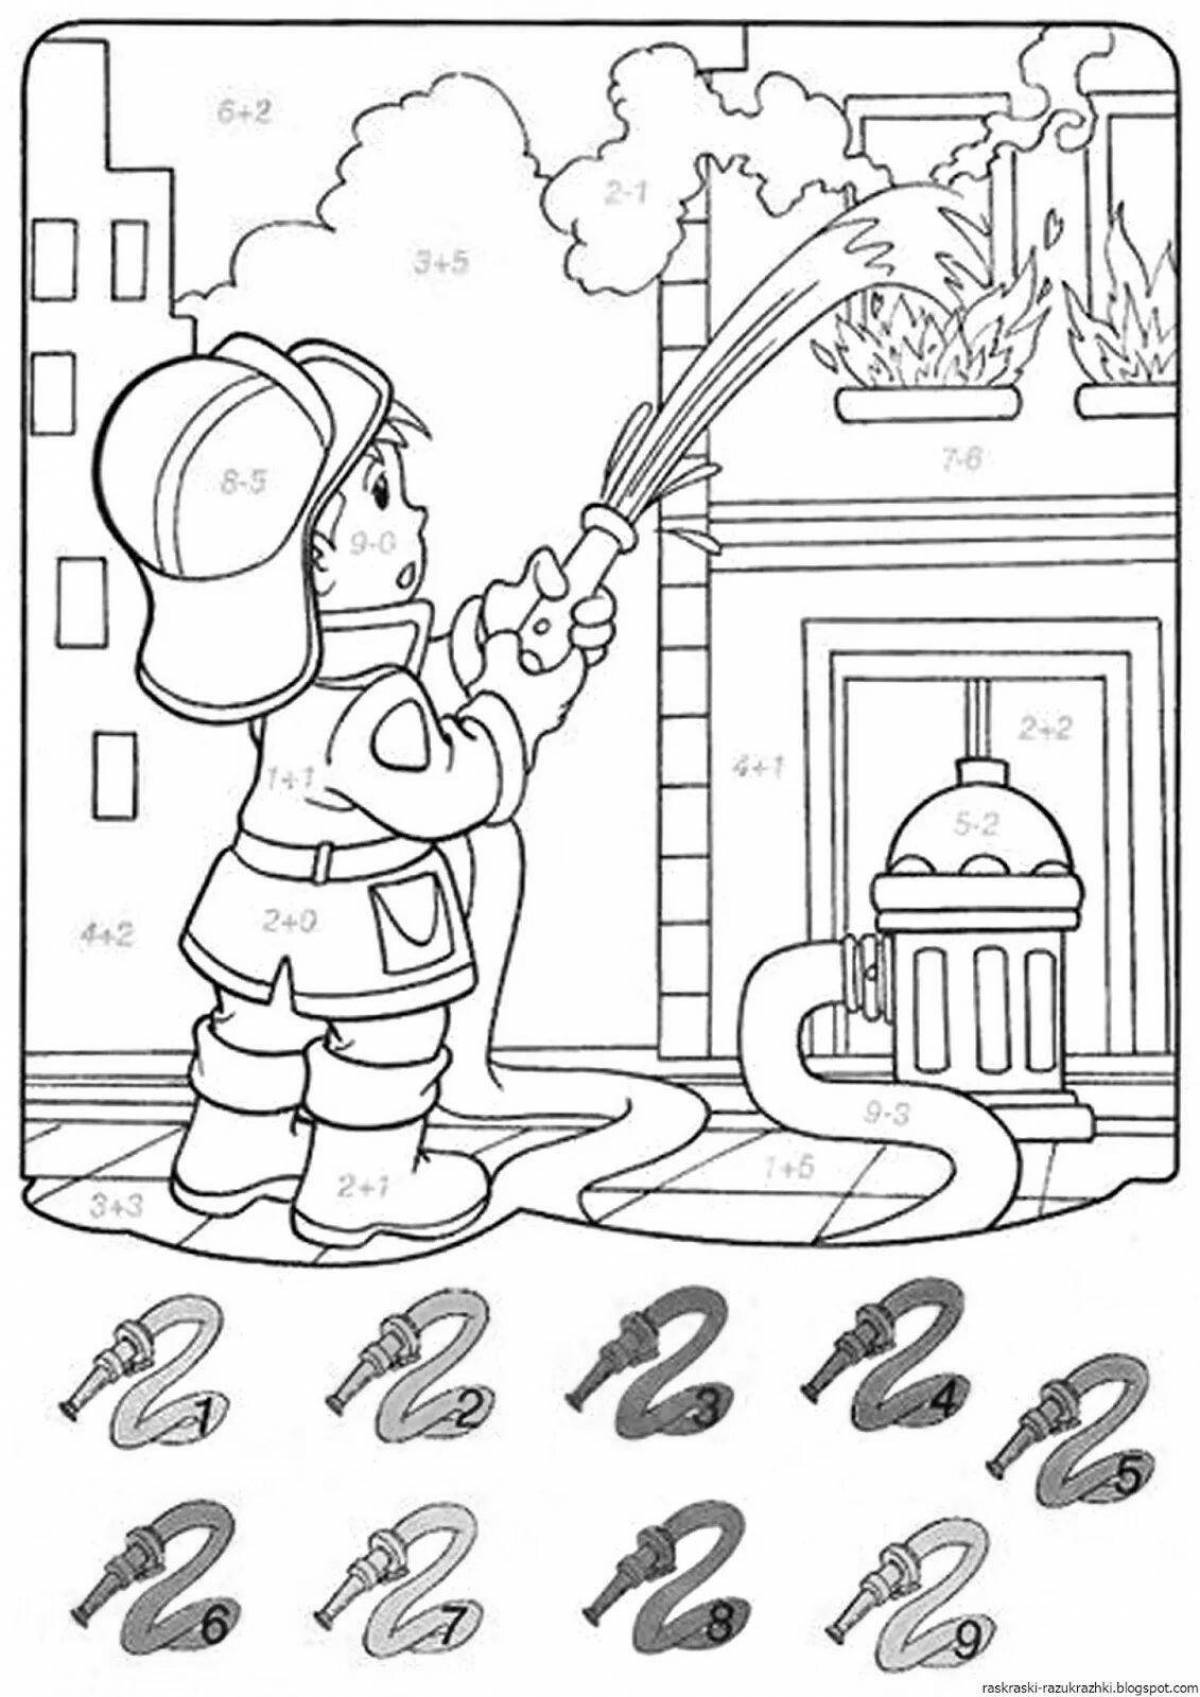 Firefighter profession coloring page